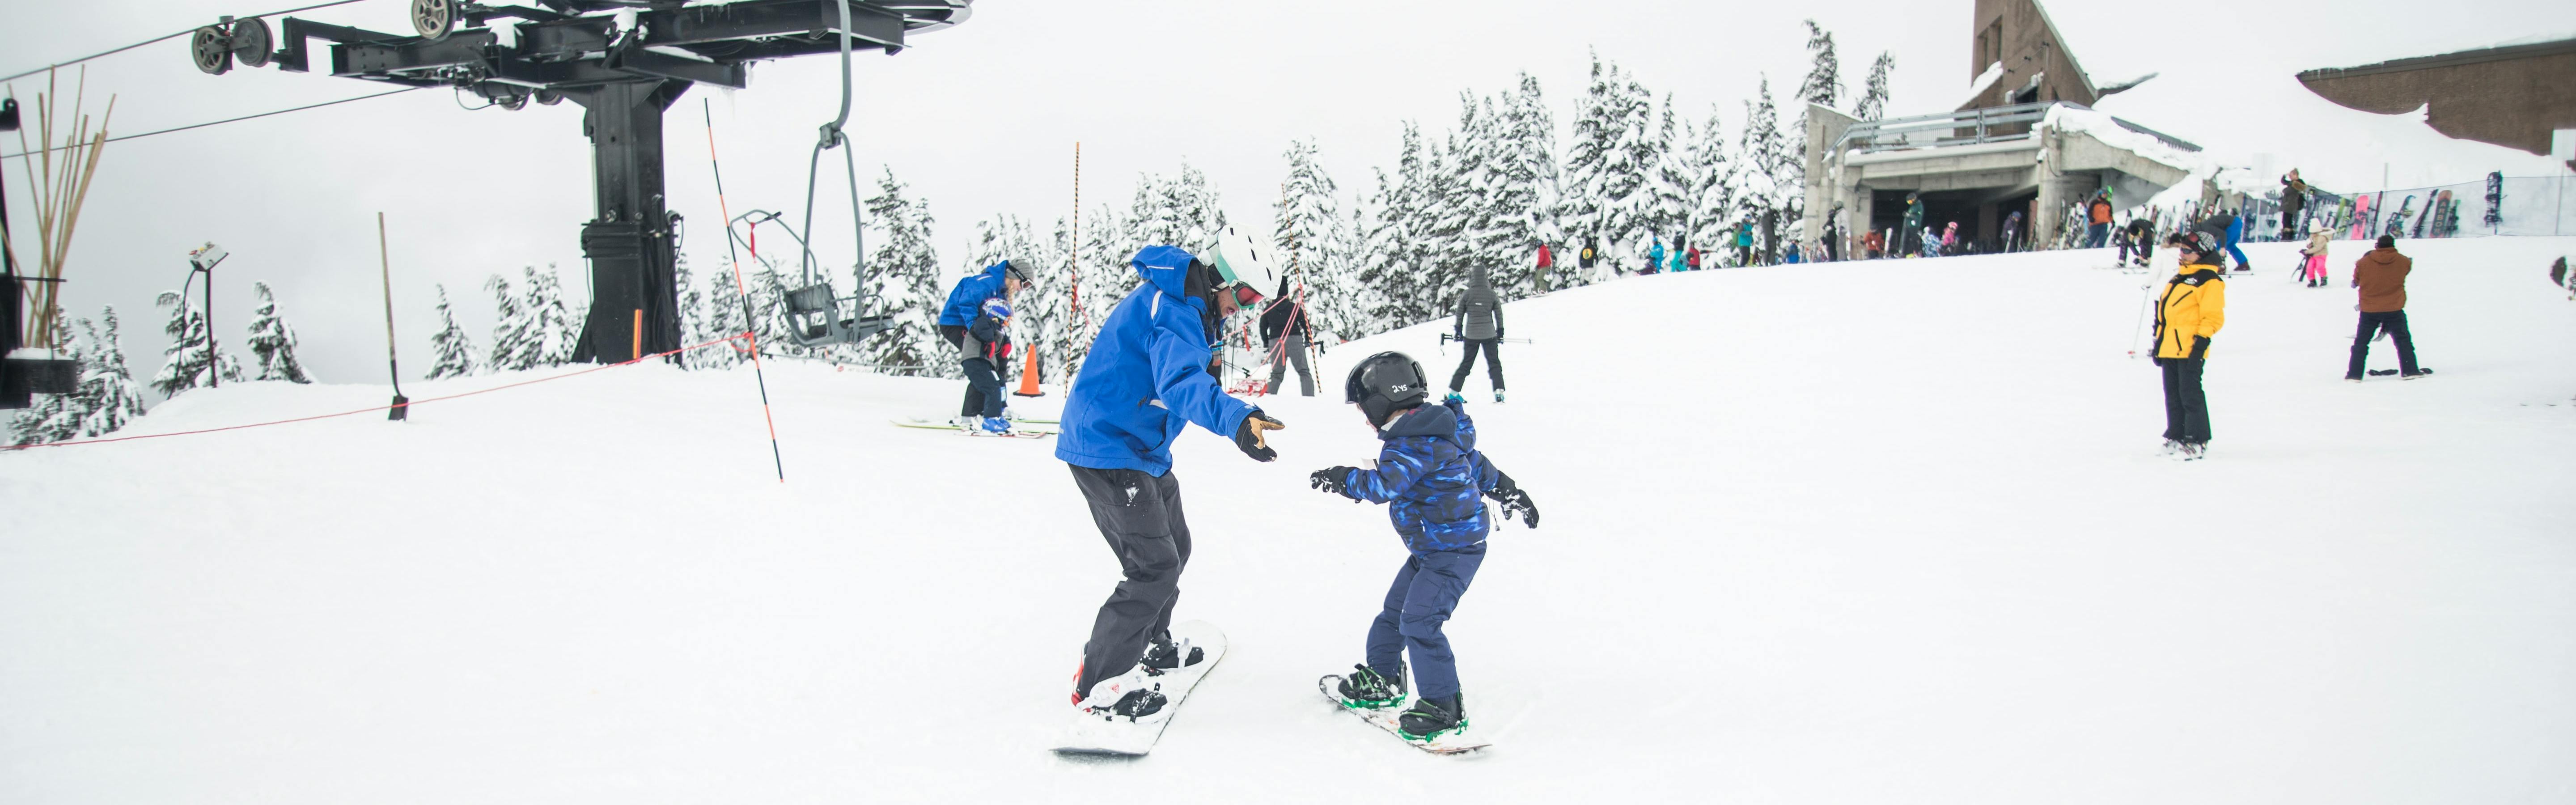 What Do Your Kids Need for Their First Day Snowboarding?